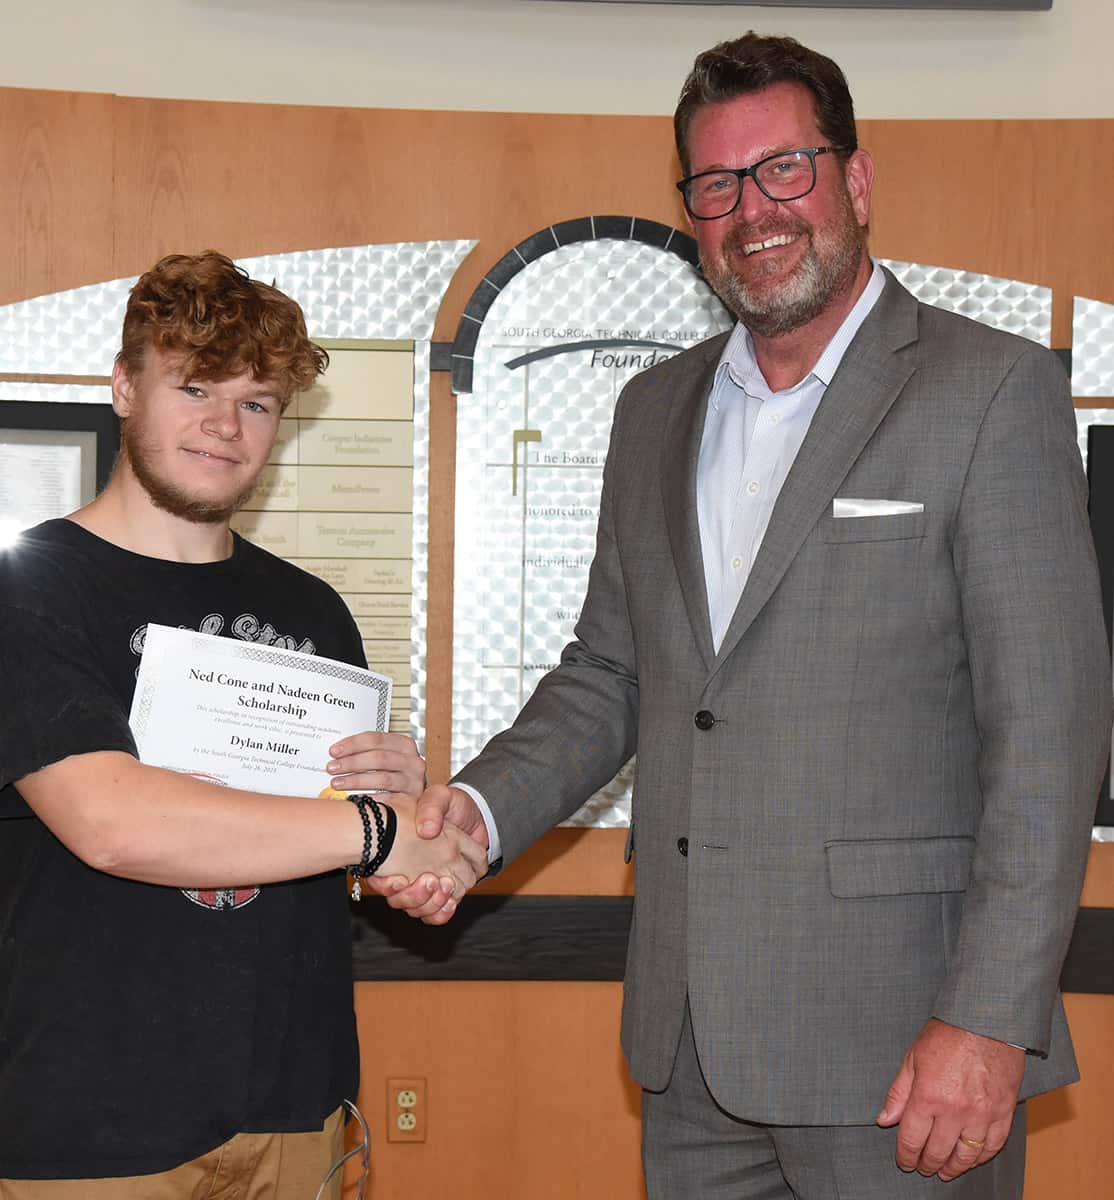 South Georgia Technical College President Dr. John Watford is shown presenting Dylan Miller, an Aviation Maintenance Technology student, with a certificate for receiving the Nadeen Green – Ned Cone Scholarship.